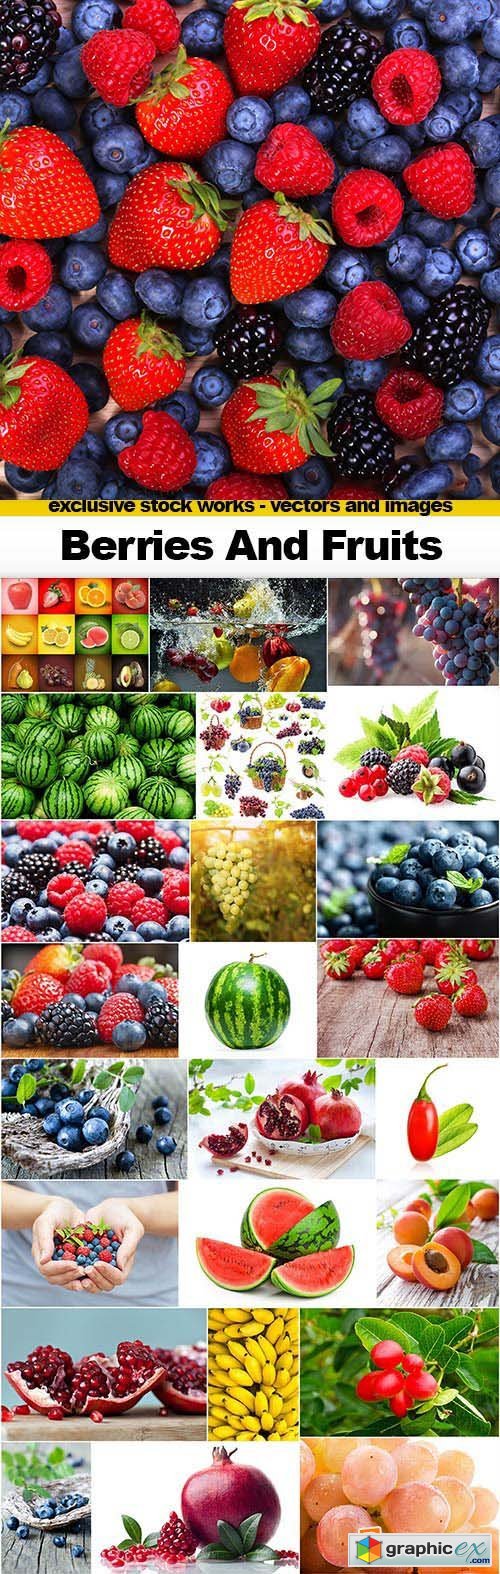 Berries and Fruits - 25x JPEGs